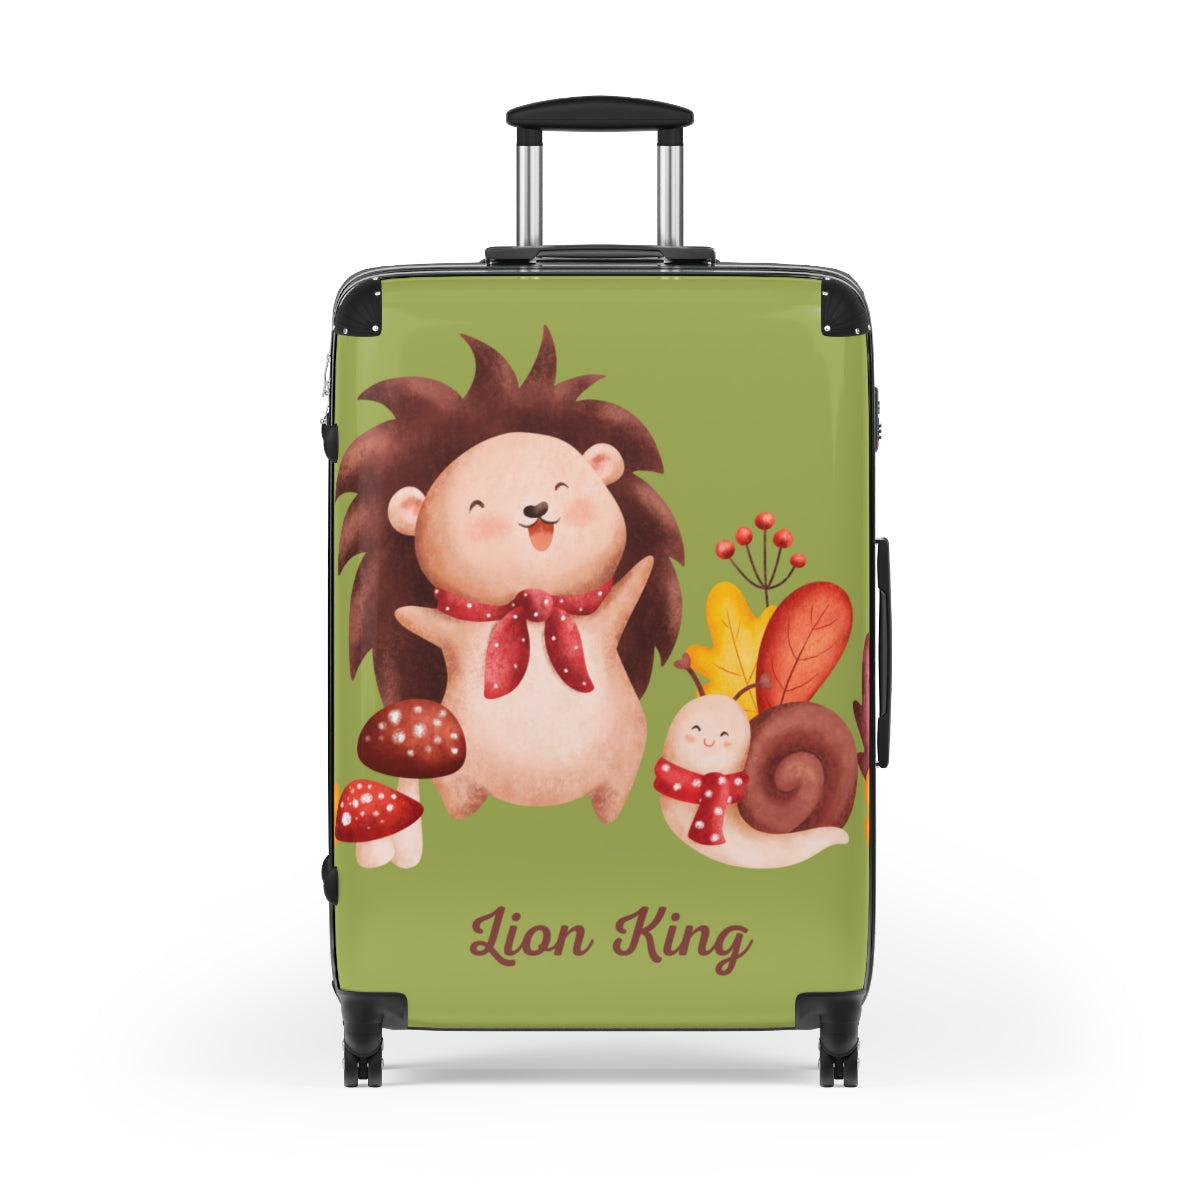 KIDS CARRY-ON Suitcases, Lion King, Boys Cabin Suitcases, Kids Luggage With Wheels, Spinner, Combination Lock | Artzira